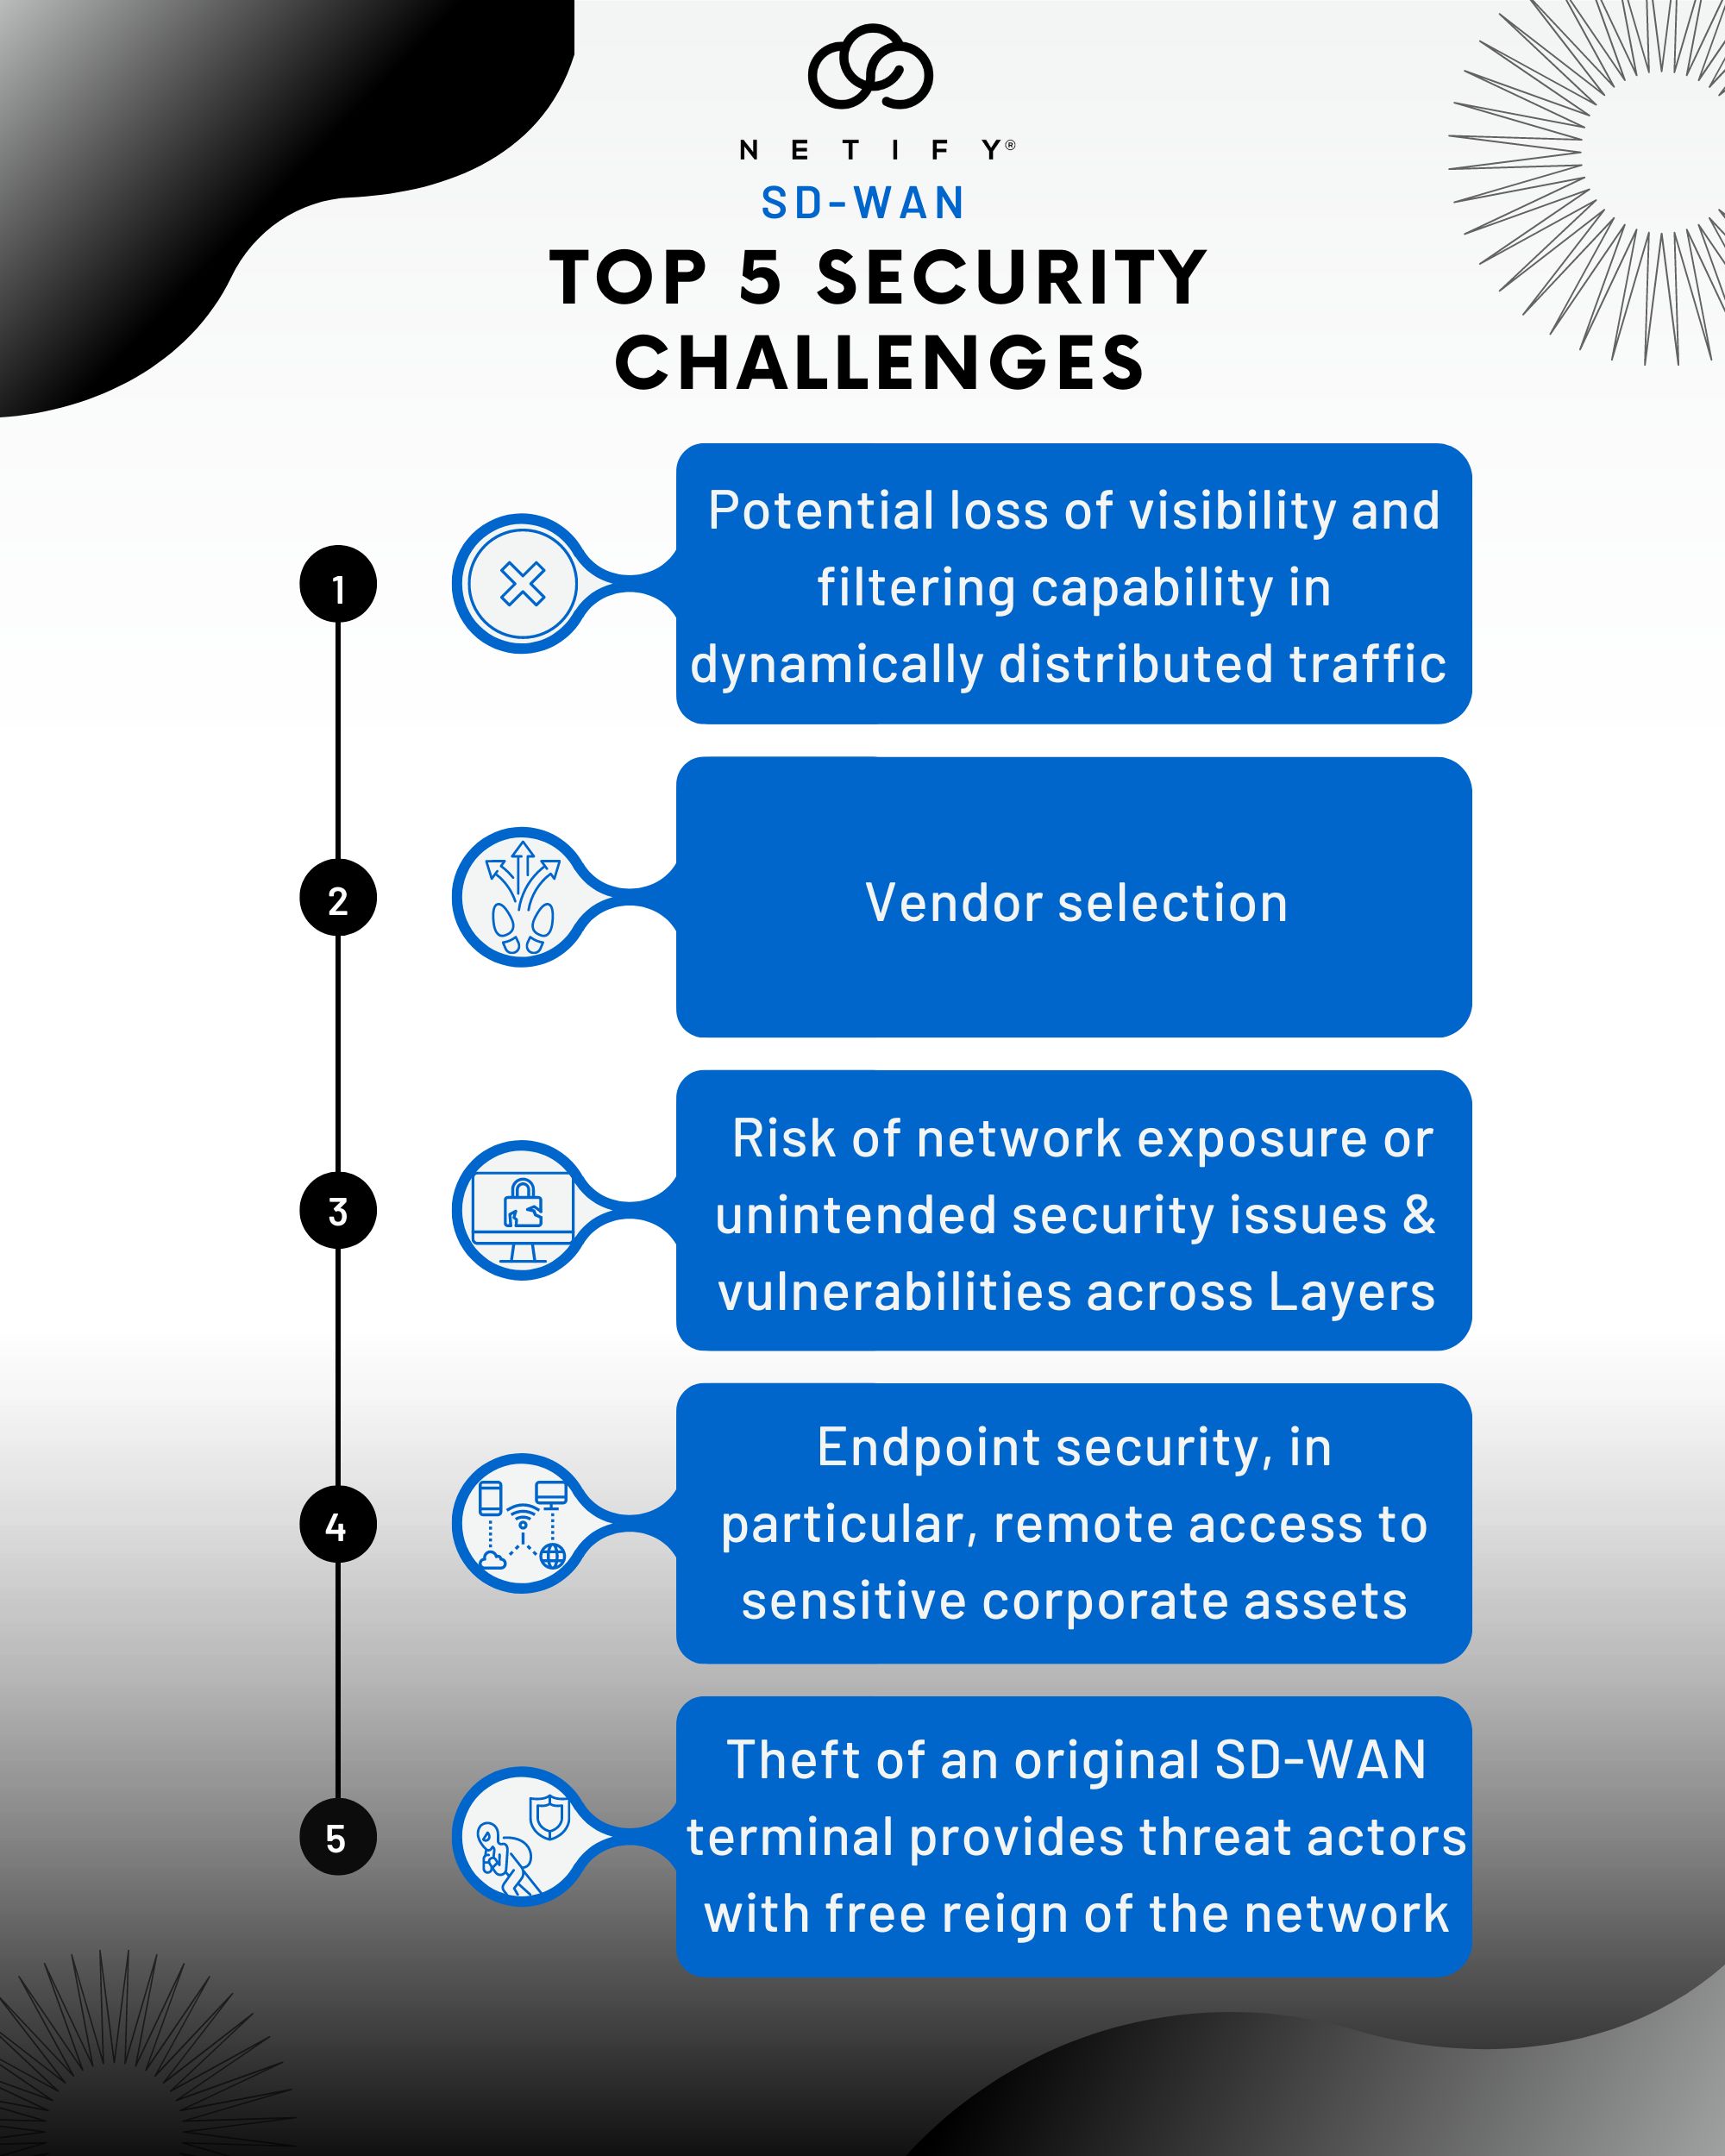 SD-WAN Top 5 Security Challenges